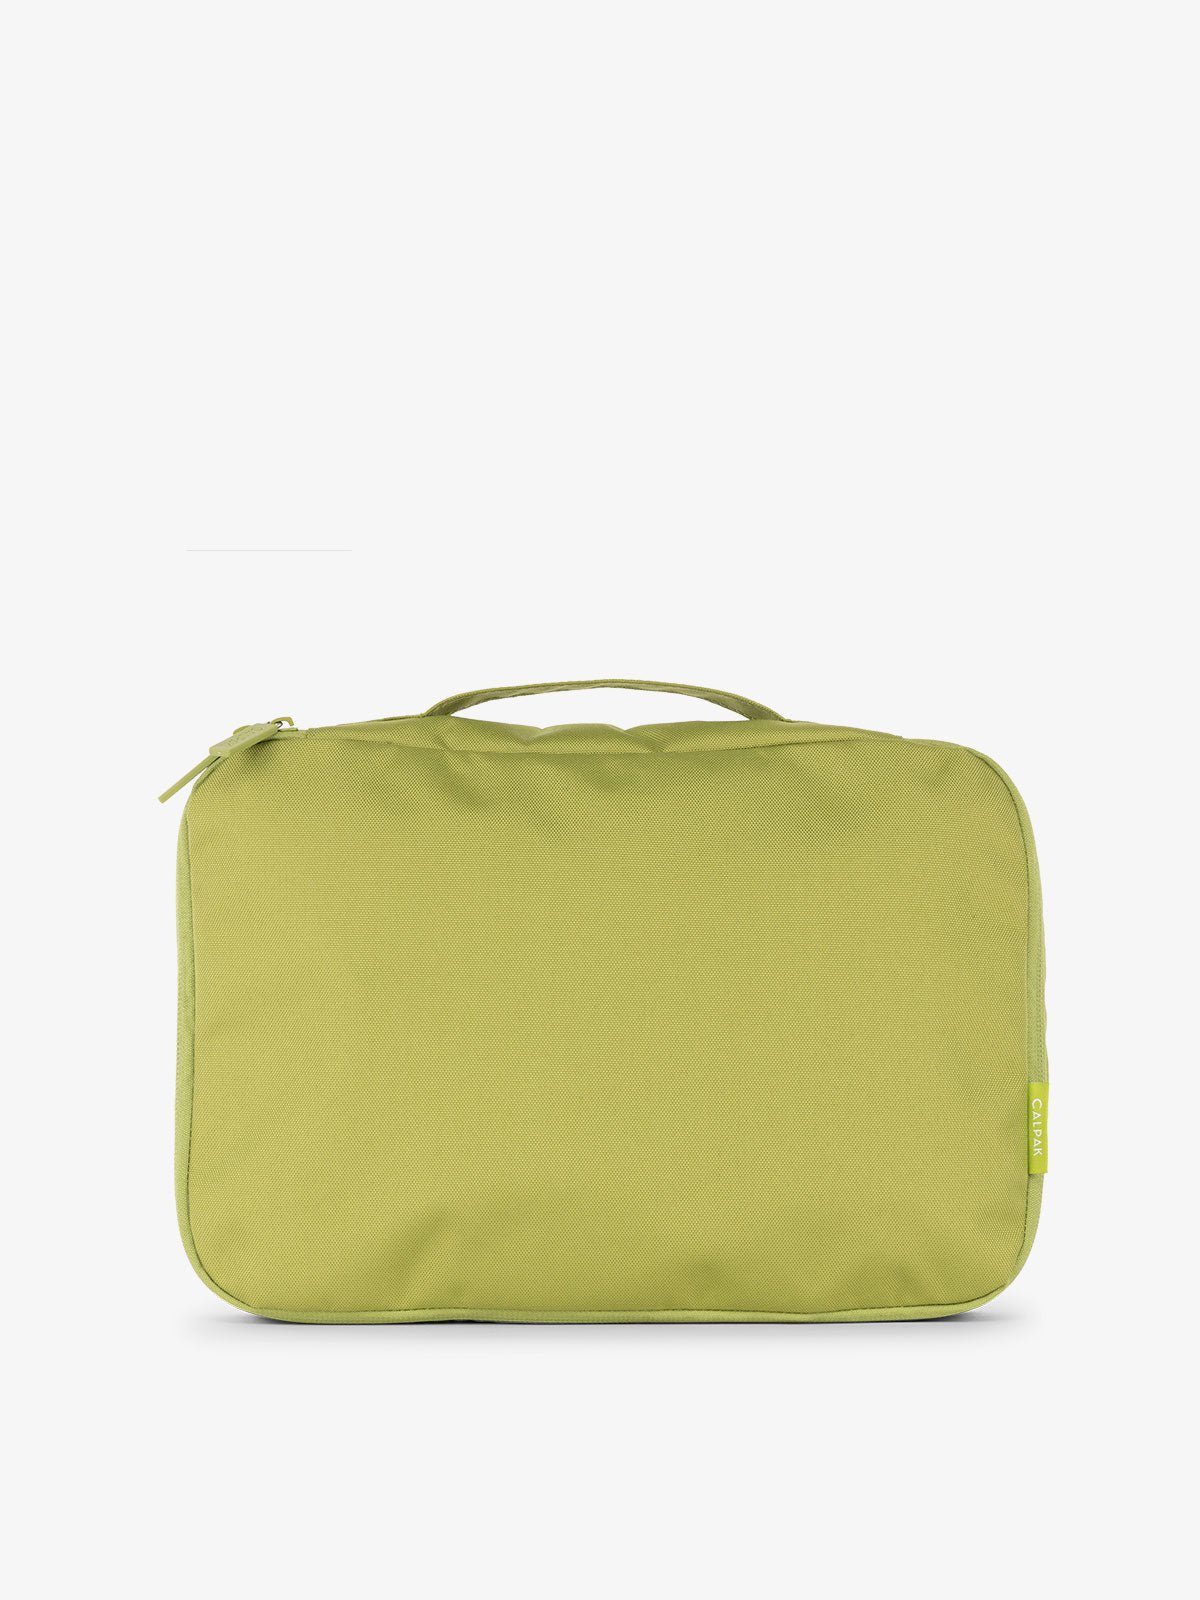 CALPAK packing cubes with top handle in light green